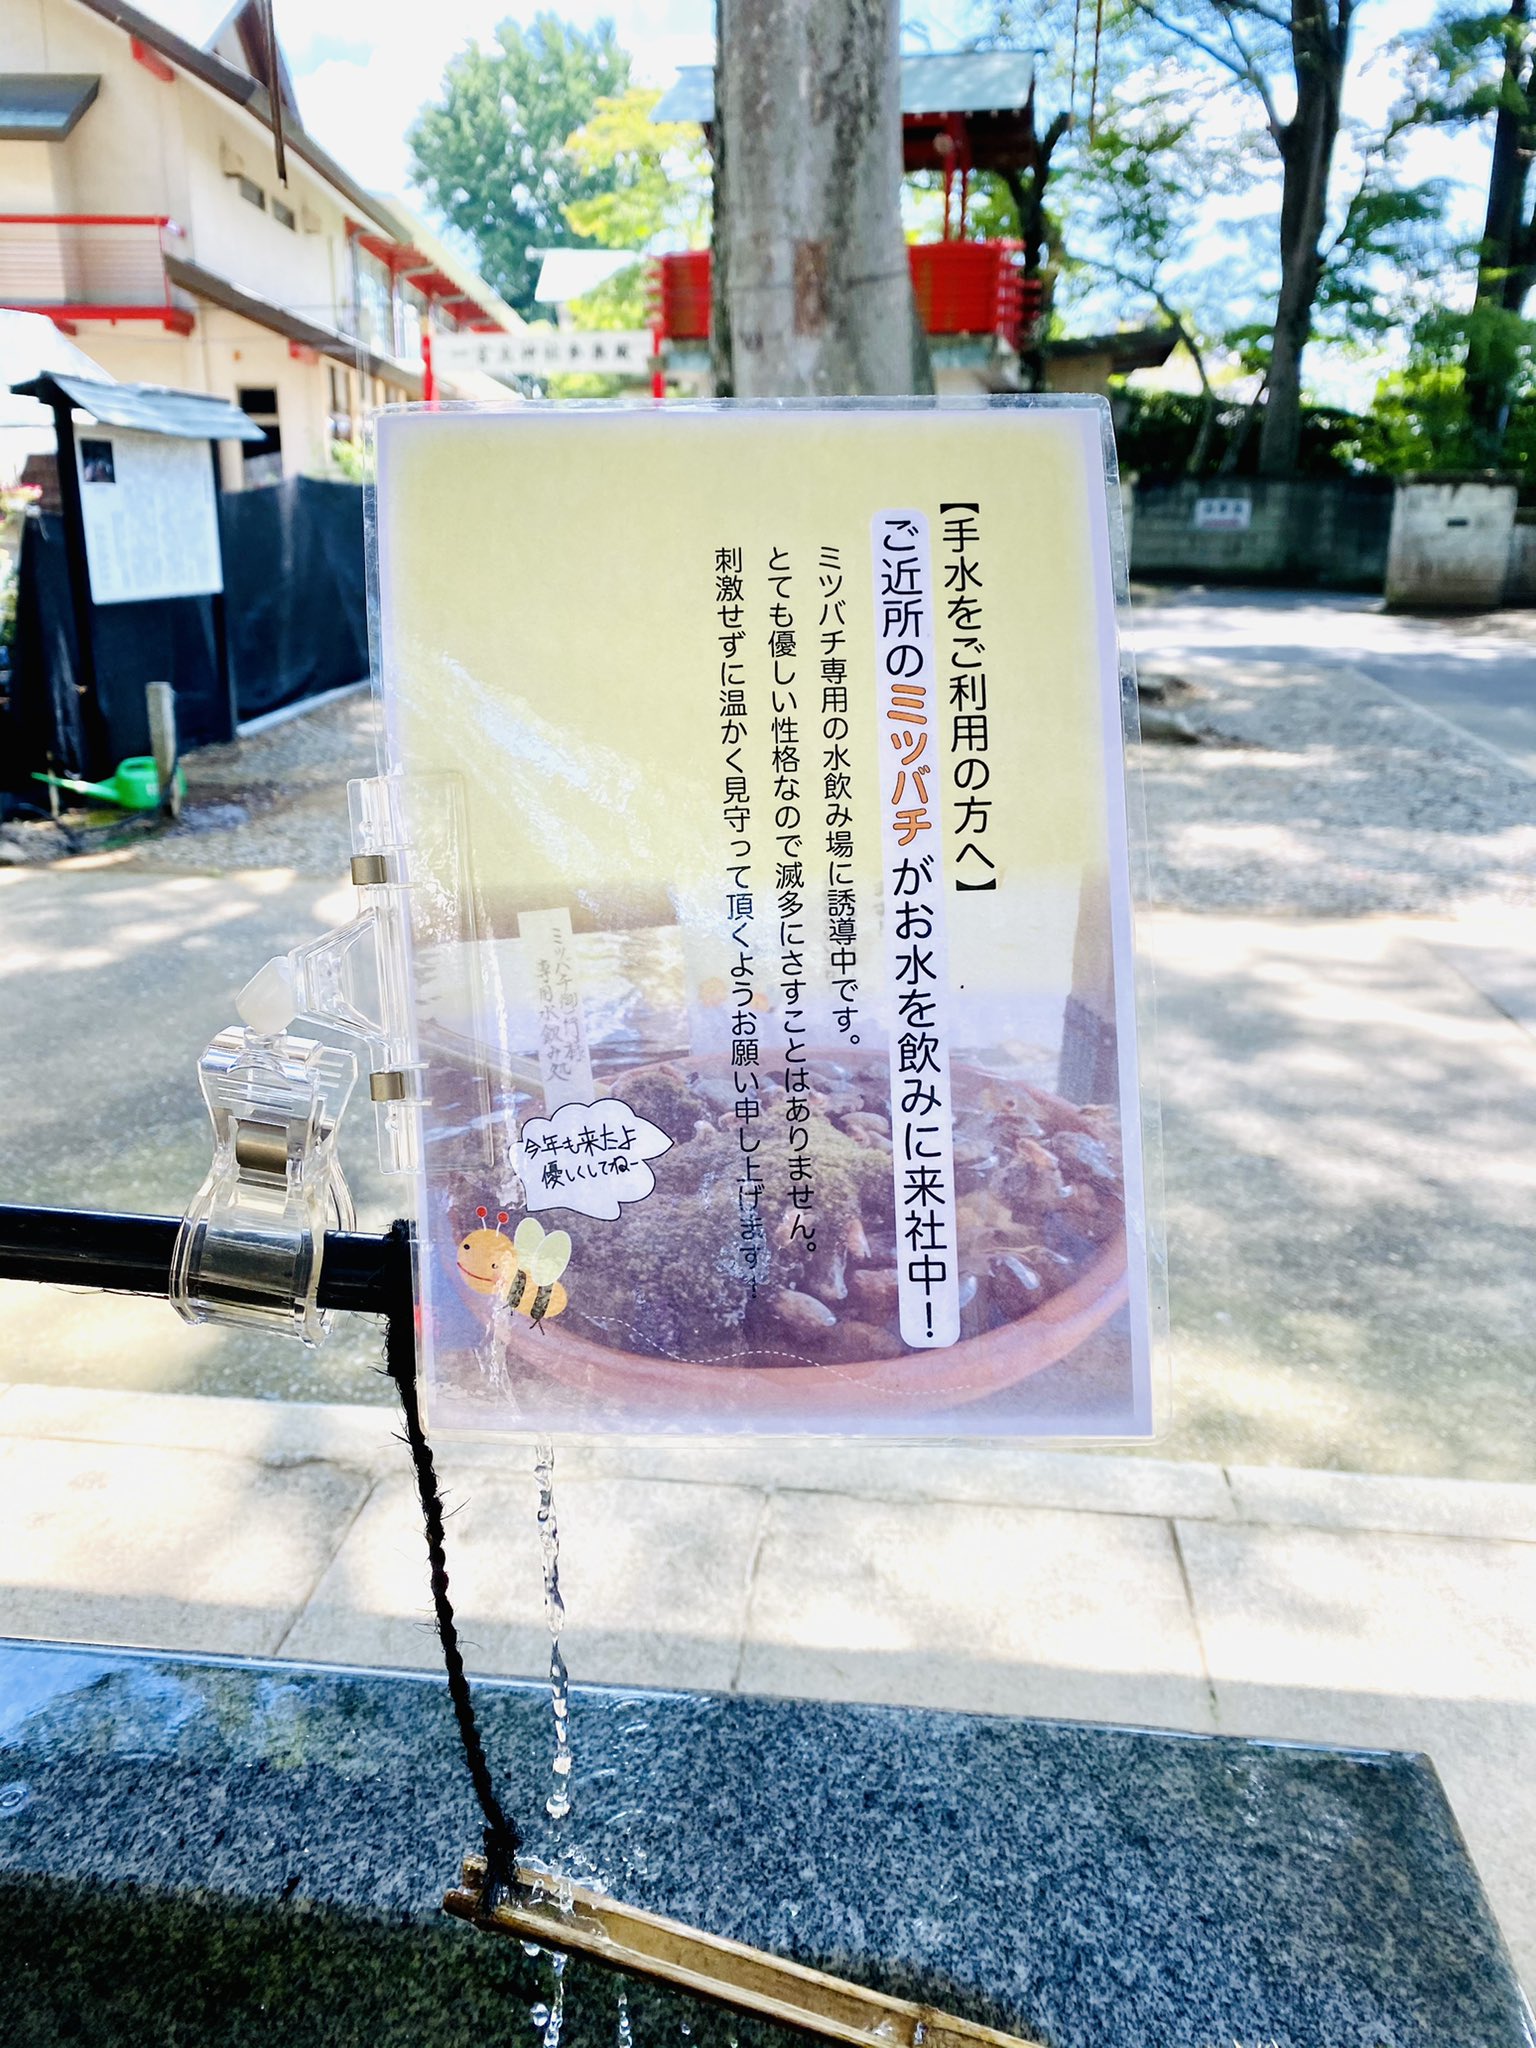 Japanese shrine creates special water fountain for thirsty bees